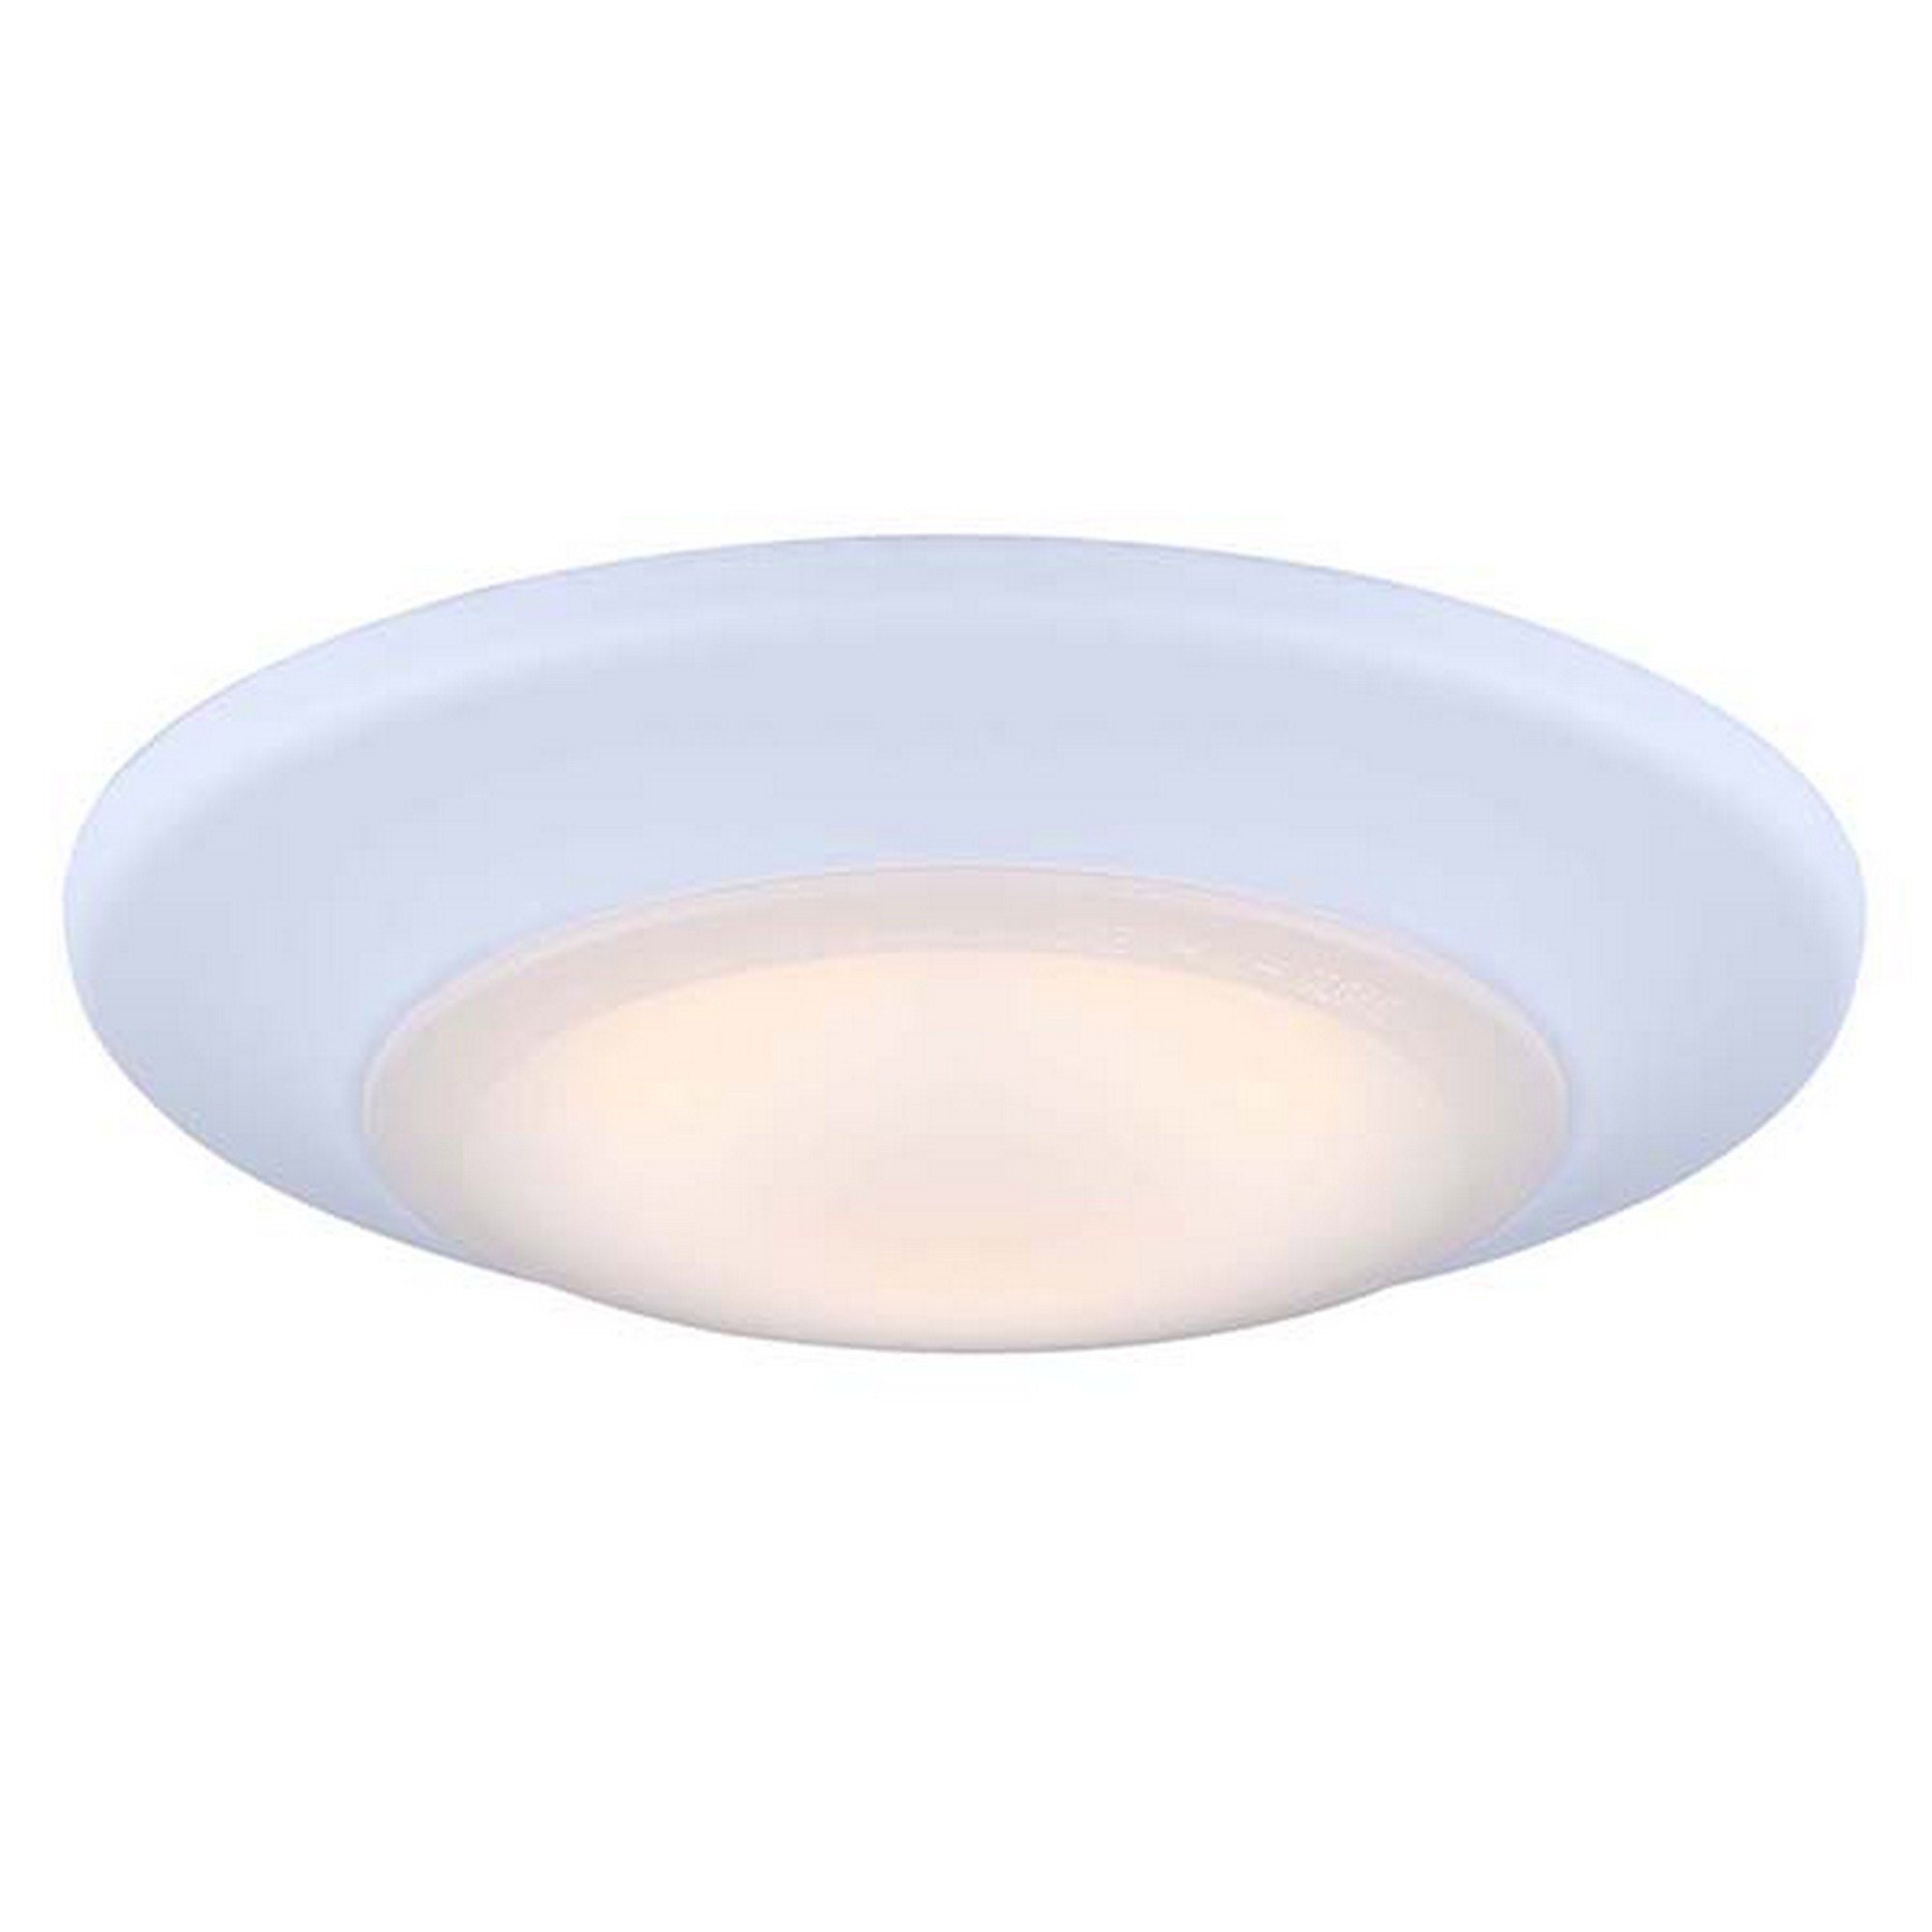 LED 4" Wide Low Profile Disc Light - White Ceiling 7th Sky Design 